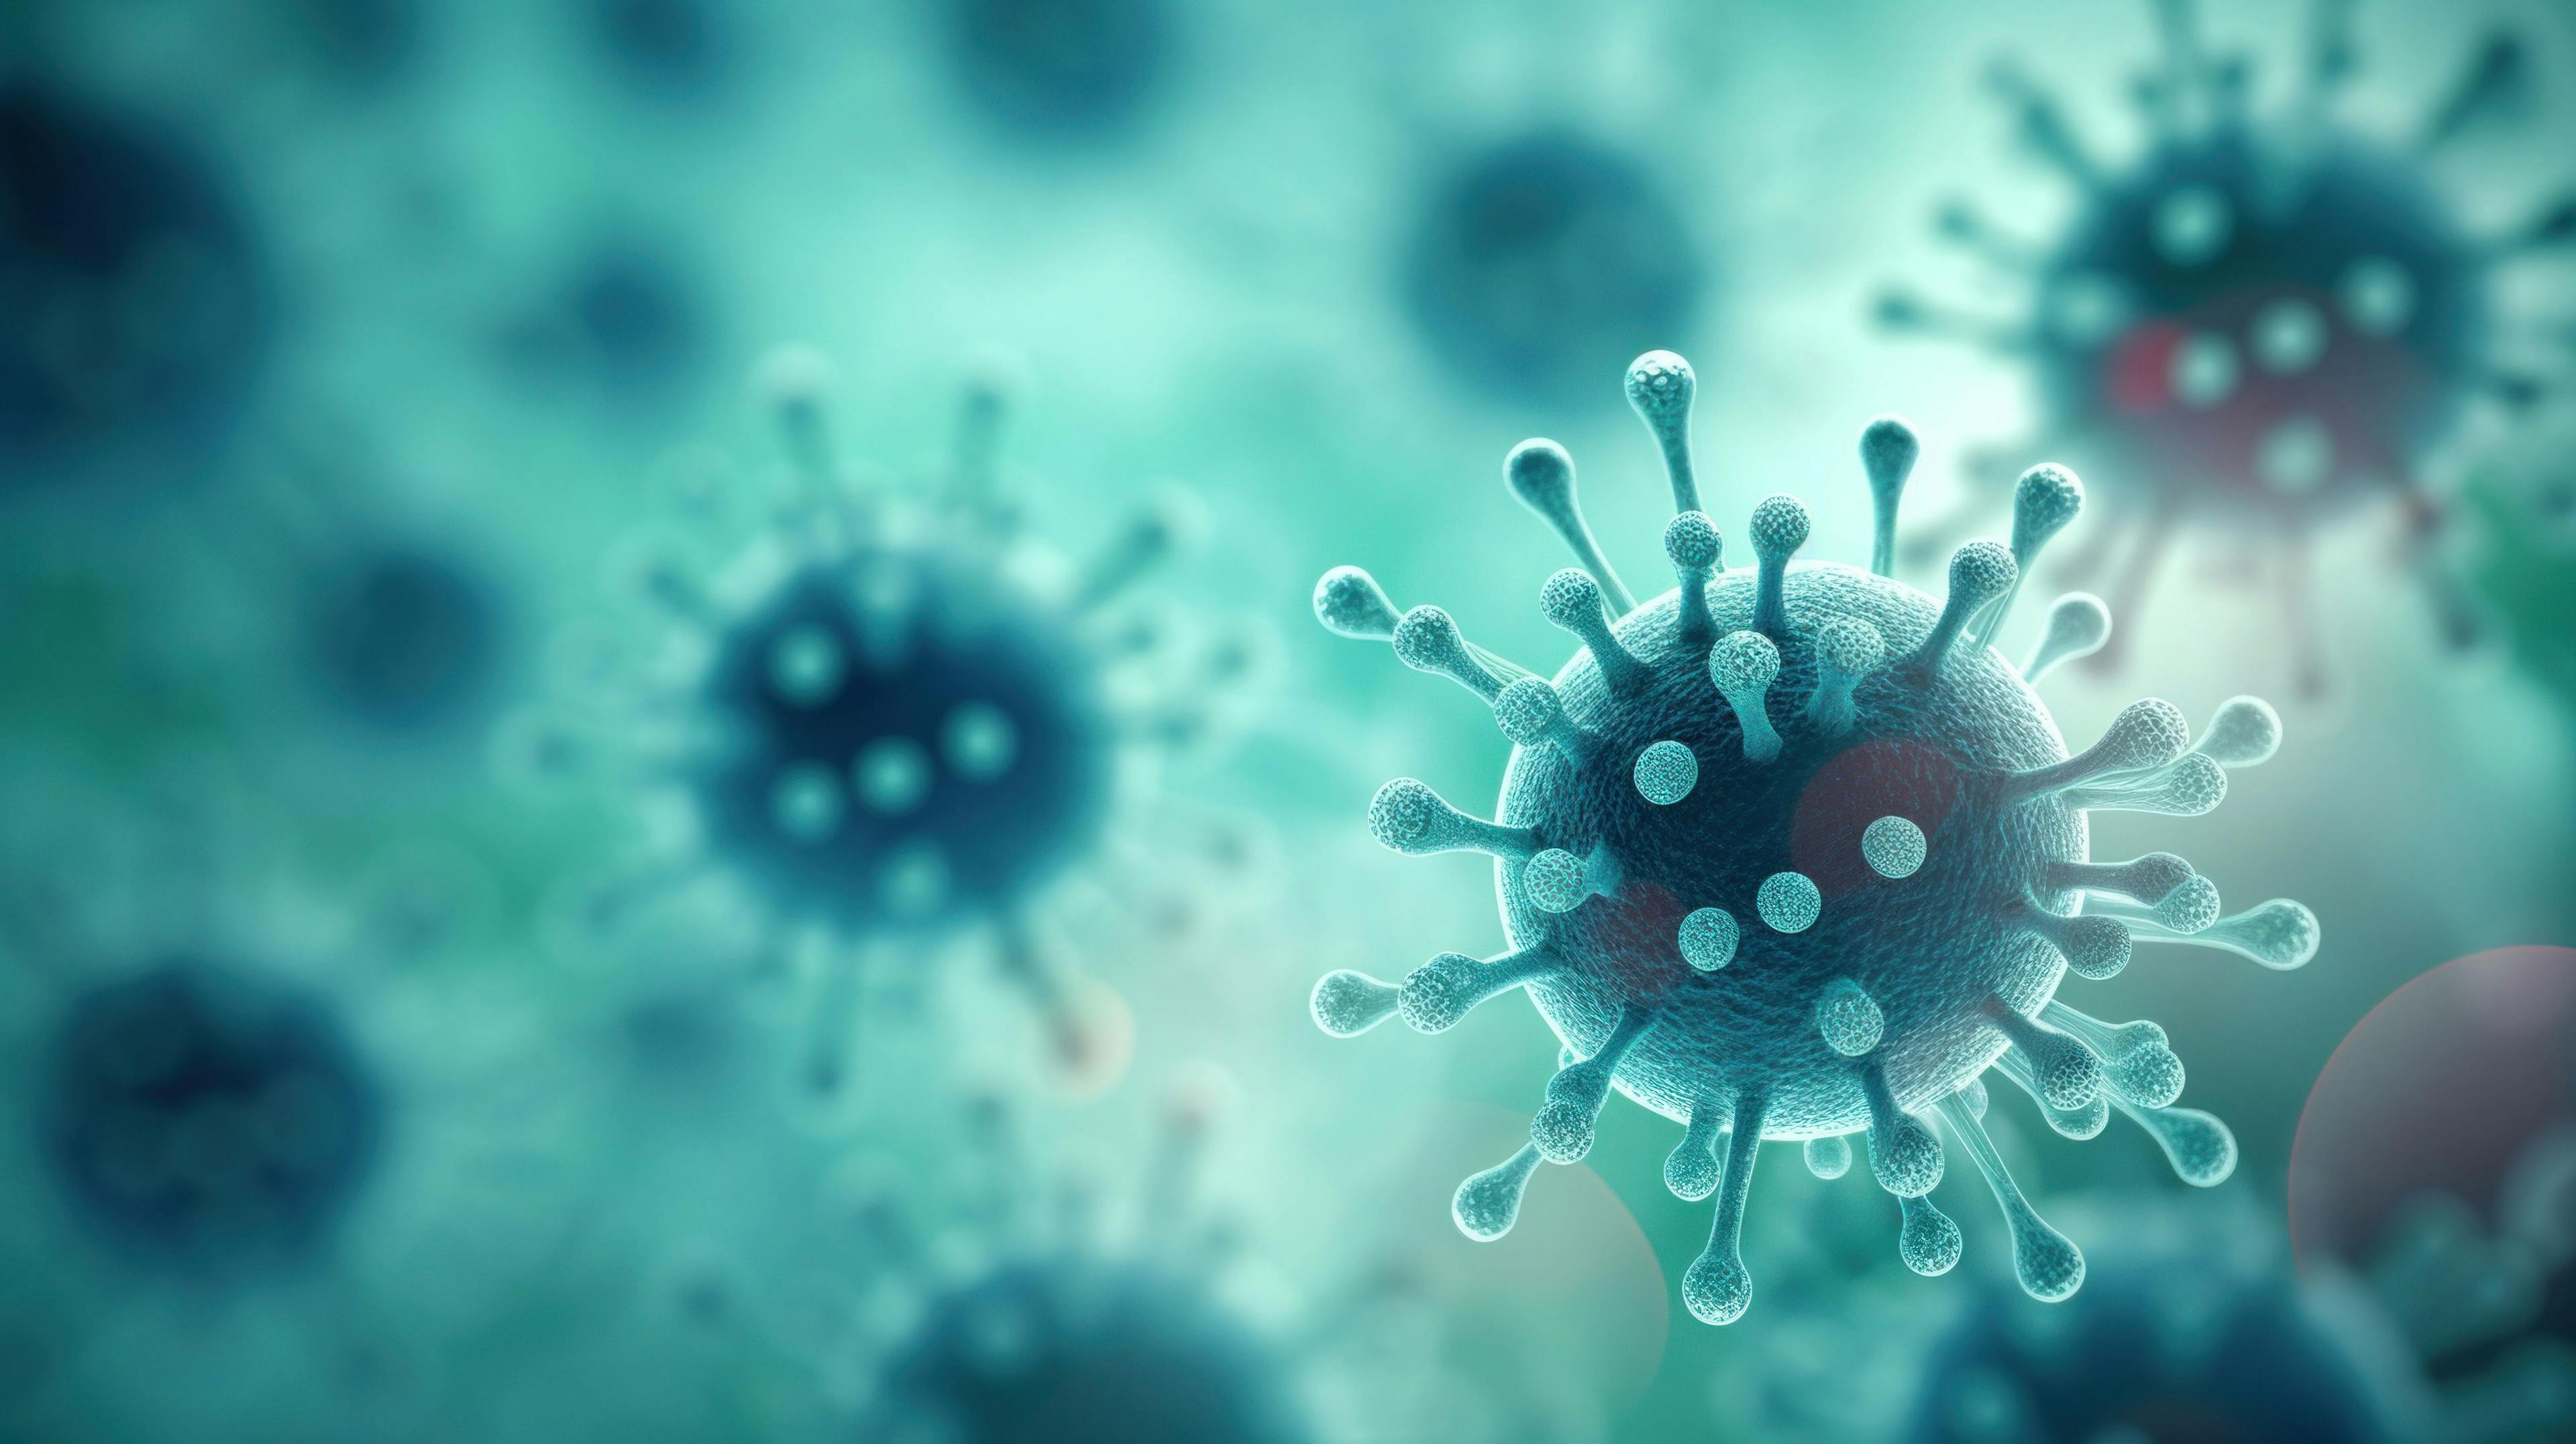 Focus on one virus, blurred background, copy space | Image Credit: © red_orange_stock - stock.adobe.com